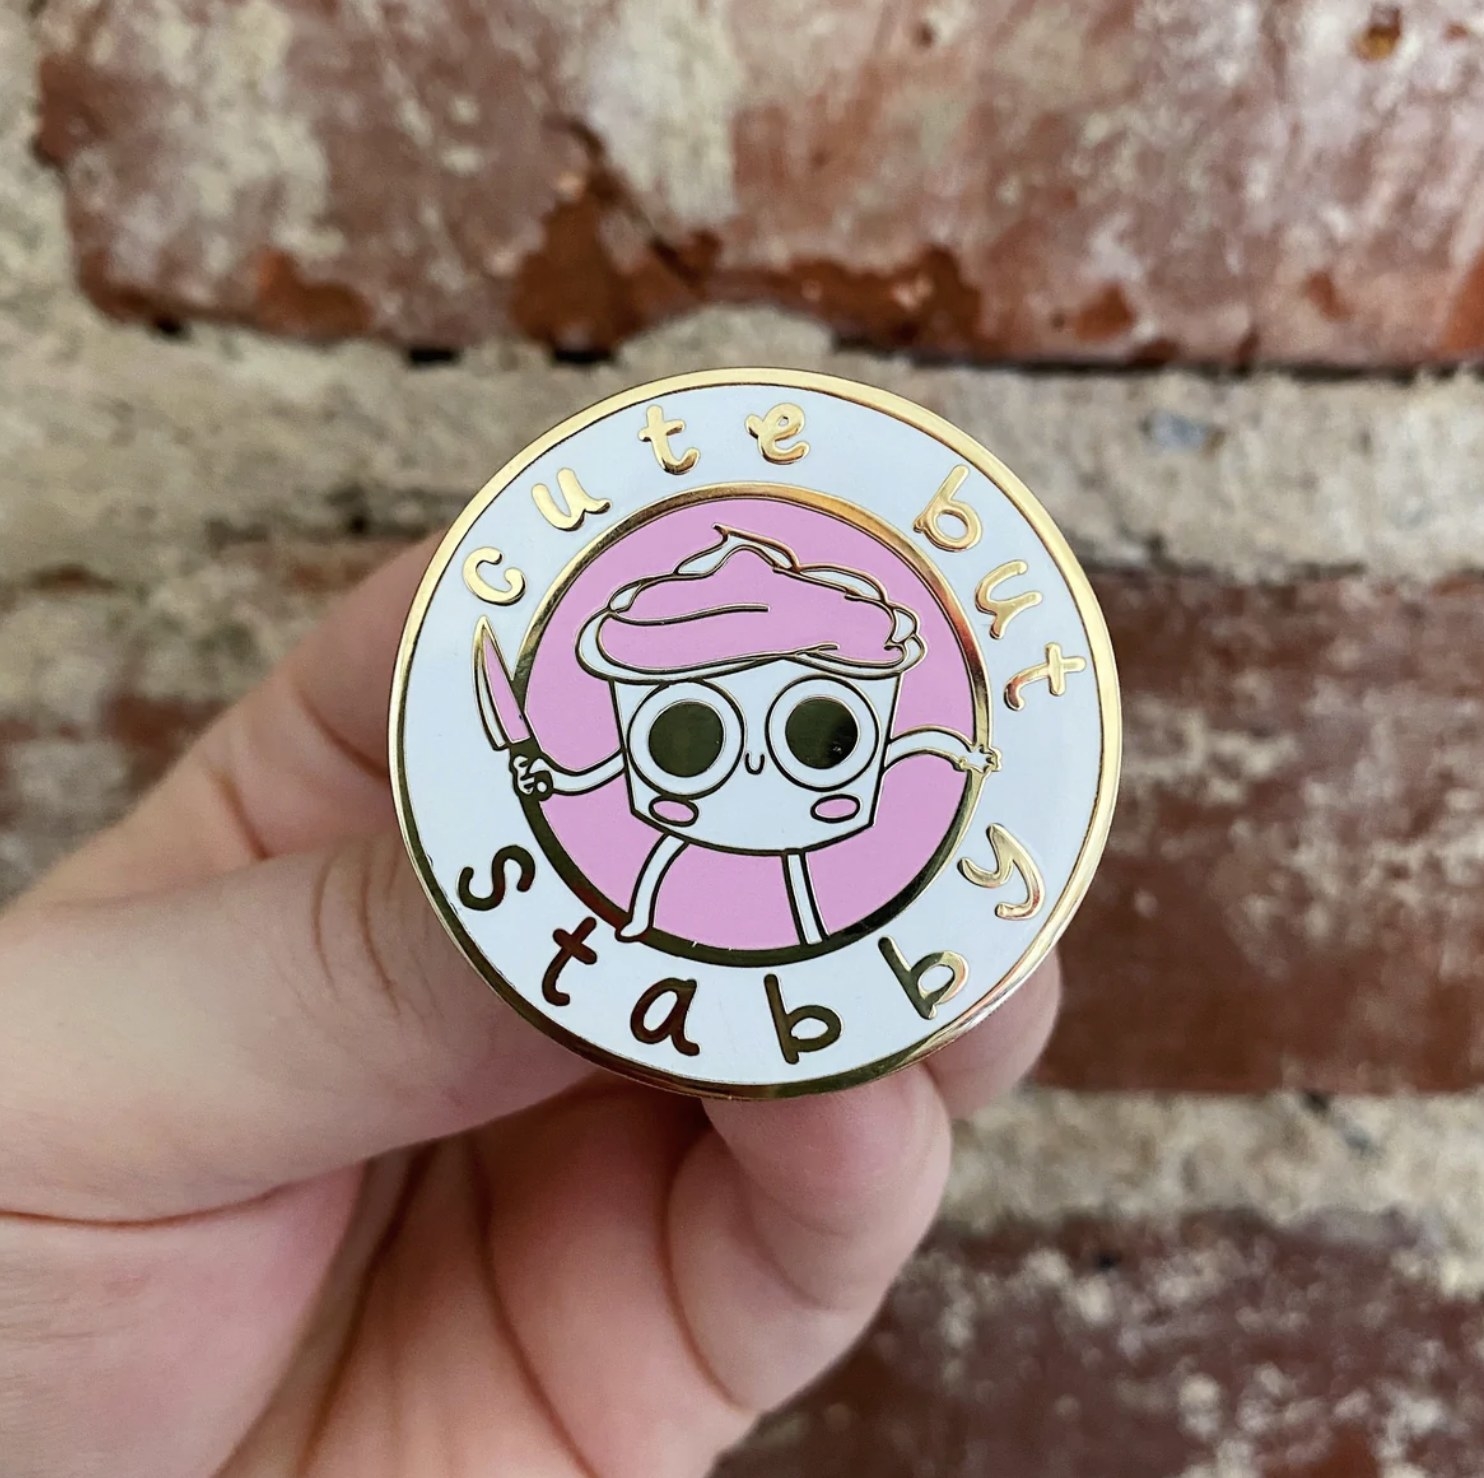 the pin that has as an animated cupcake holding a knife that says cute but stabby